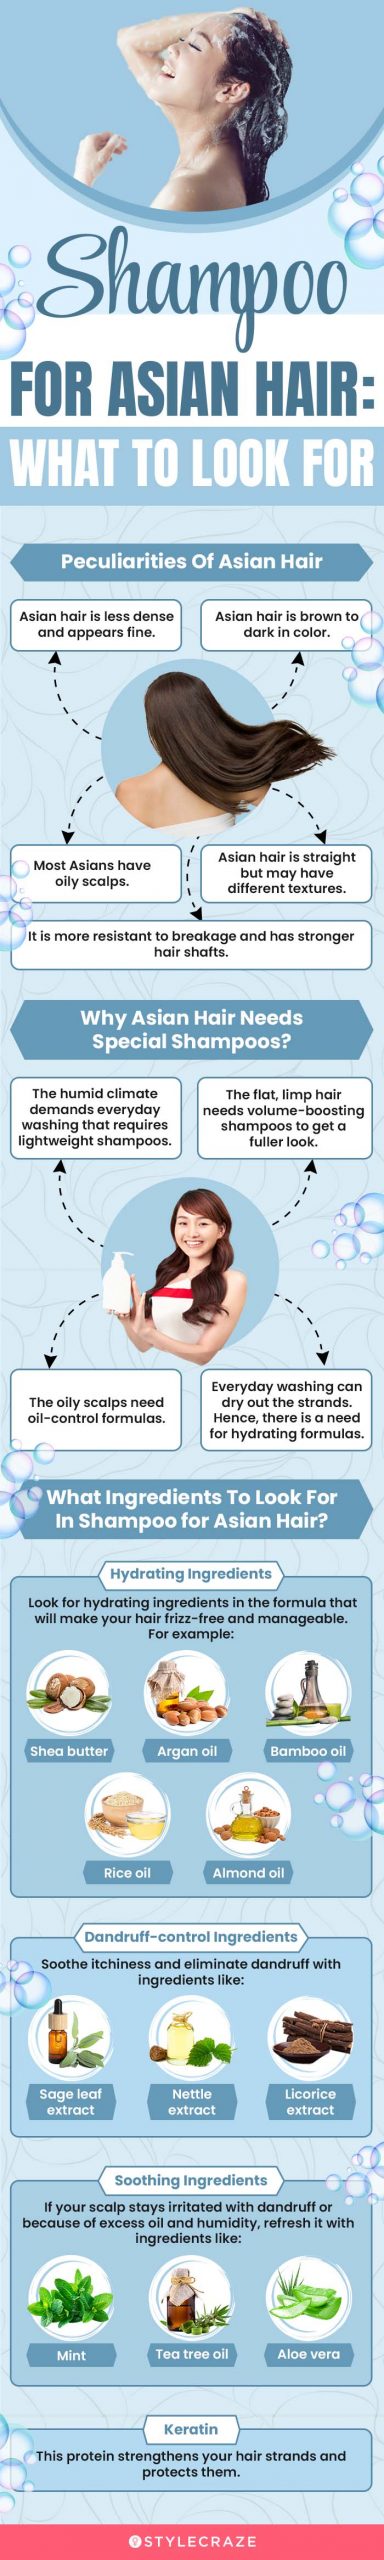 Shampoo For Asian Hair: What To Look For [infographic]